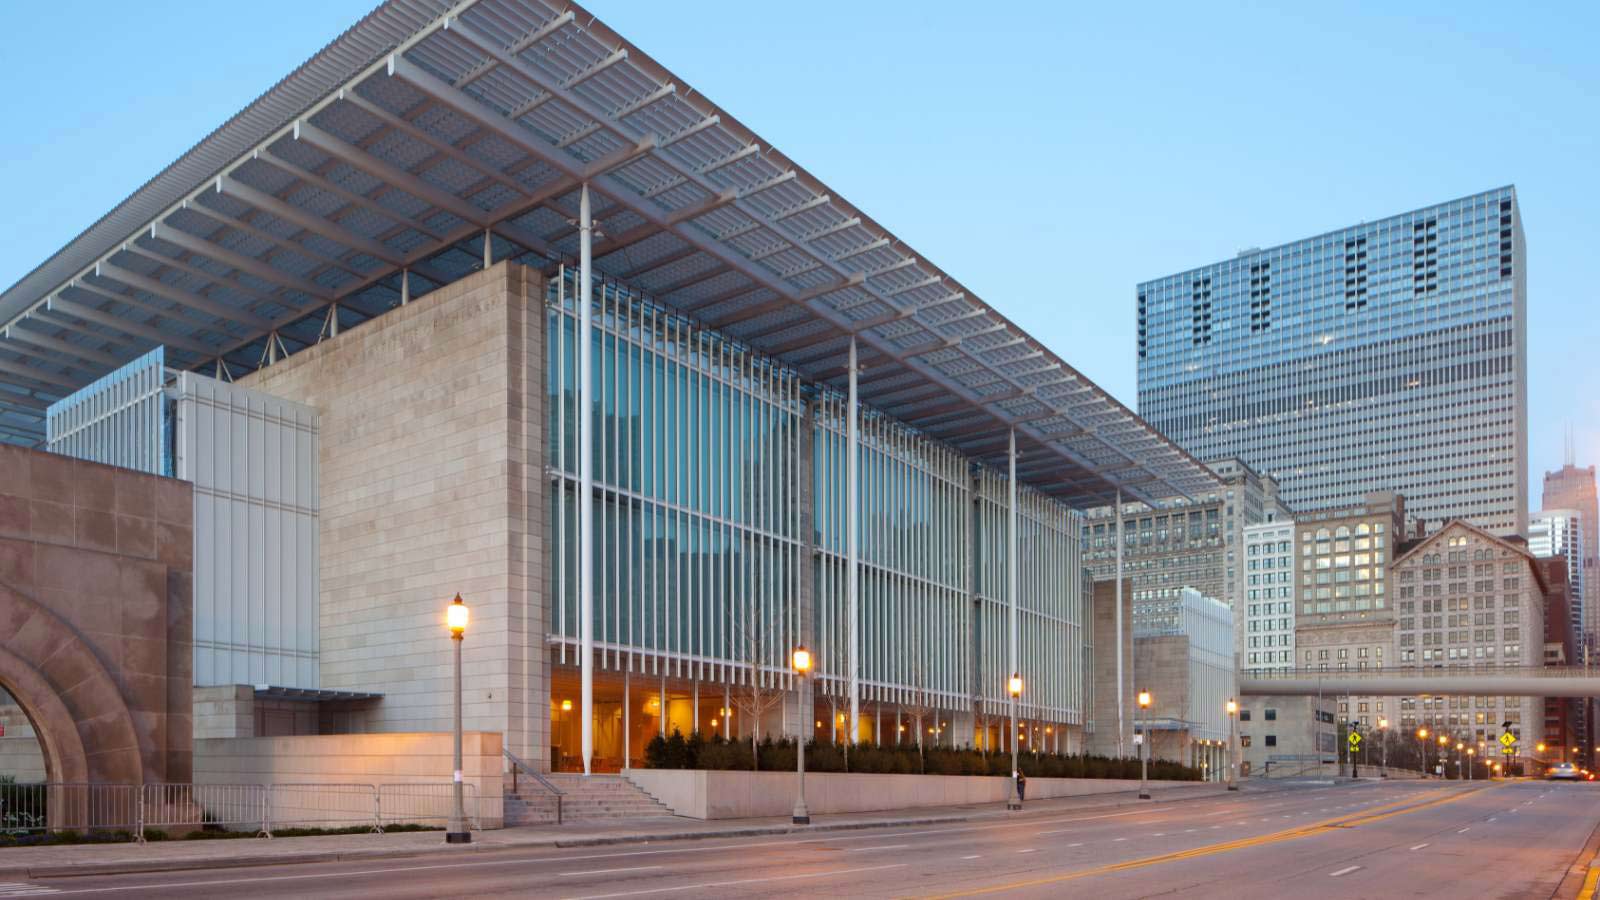 <p>Founded in 1879, the Art Institute of Chicago is a cultural hub that contains more than 300,000 works of art. The museum is still going strong and is a must-see for art lovers visiting the Windy City.</p>